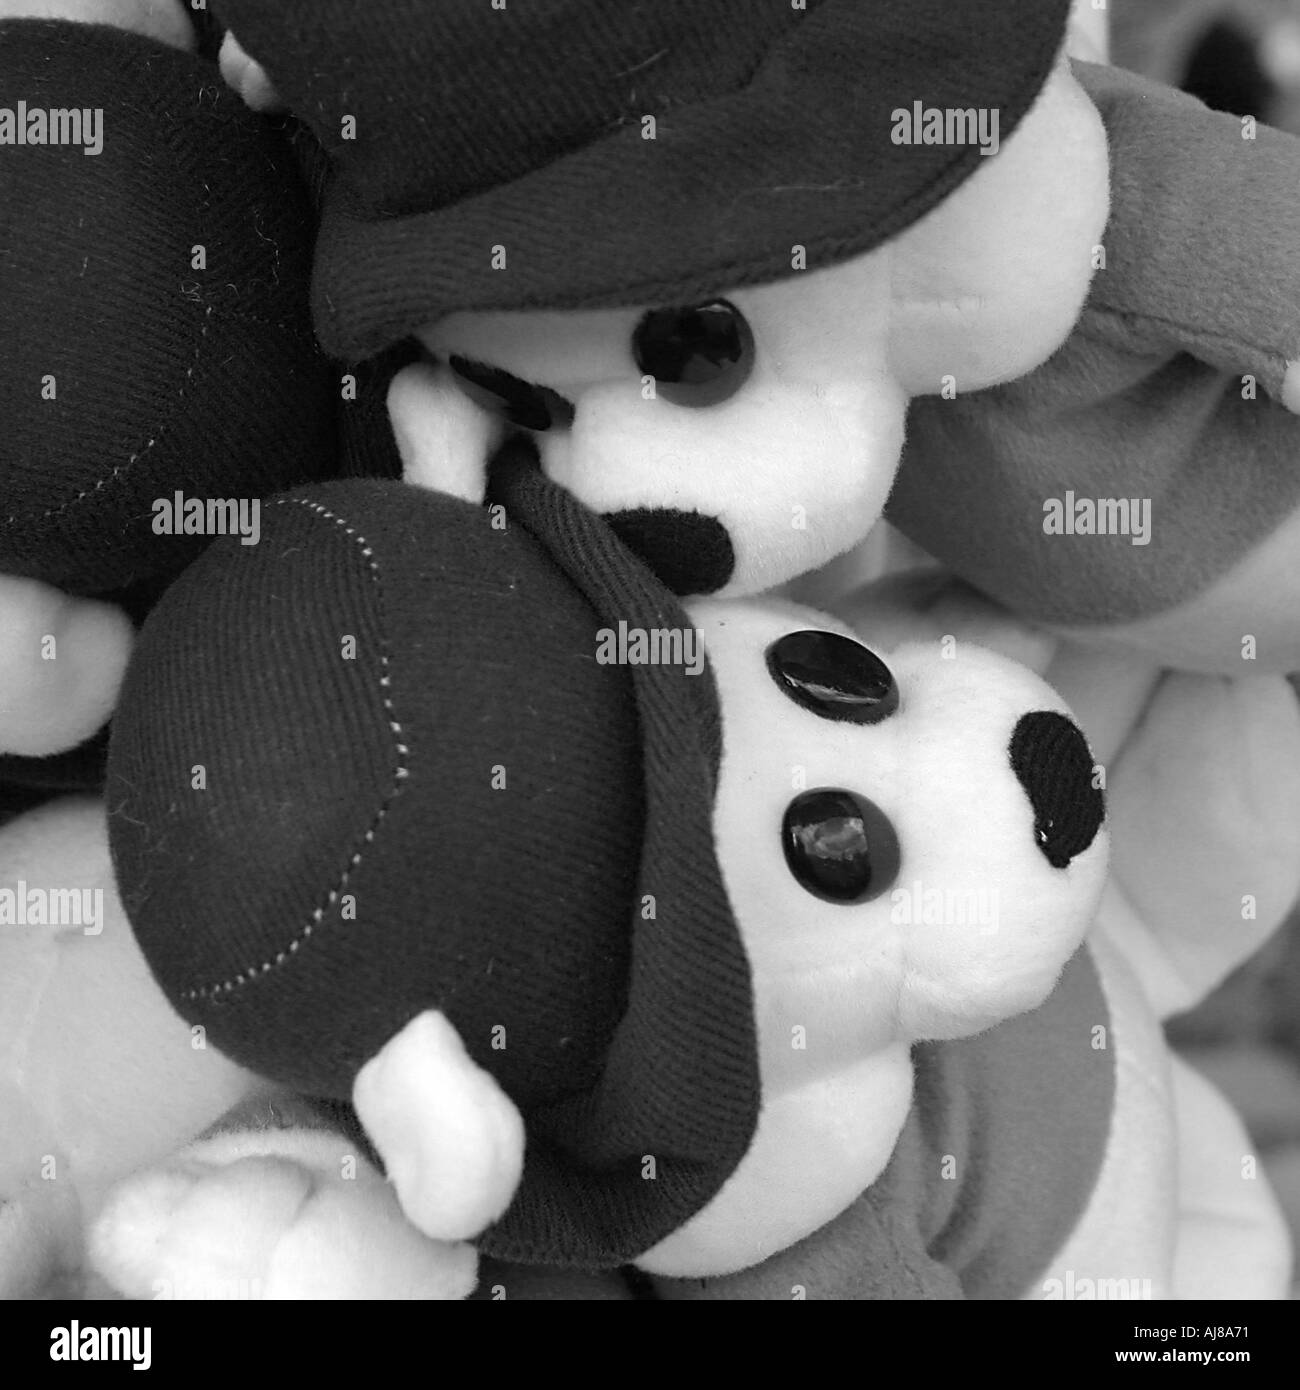 Group of soft toy bears Stock Photo